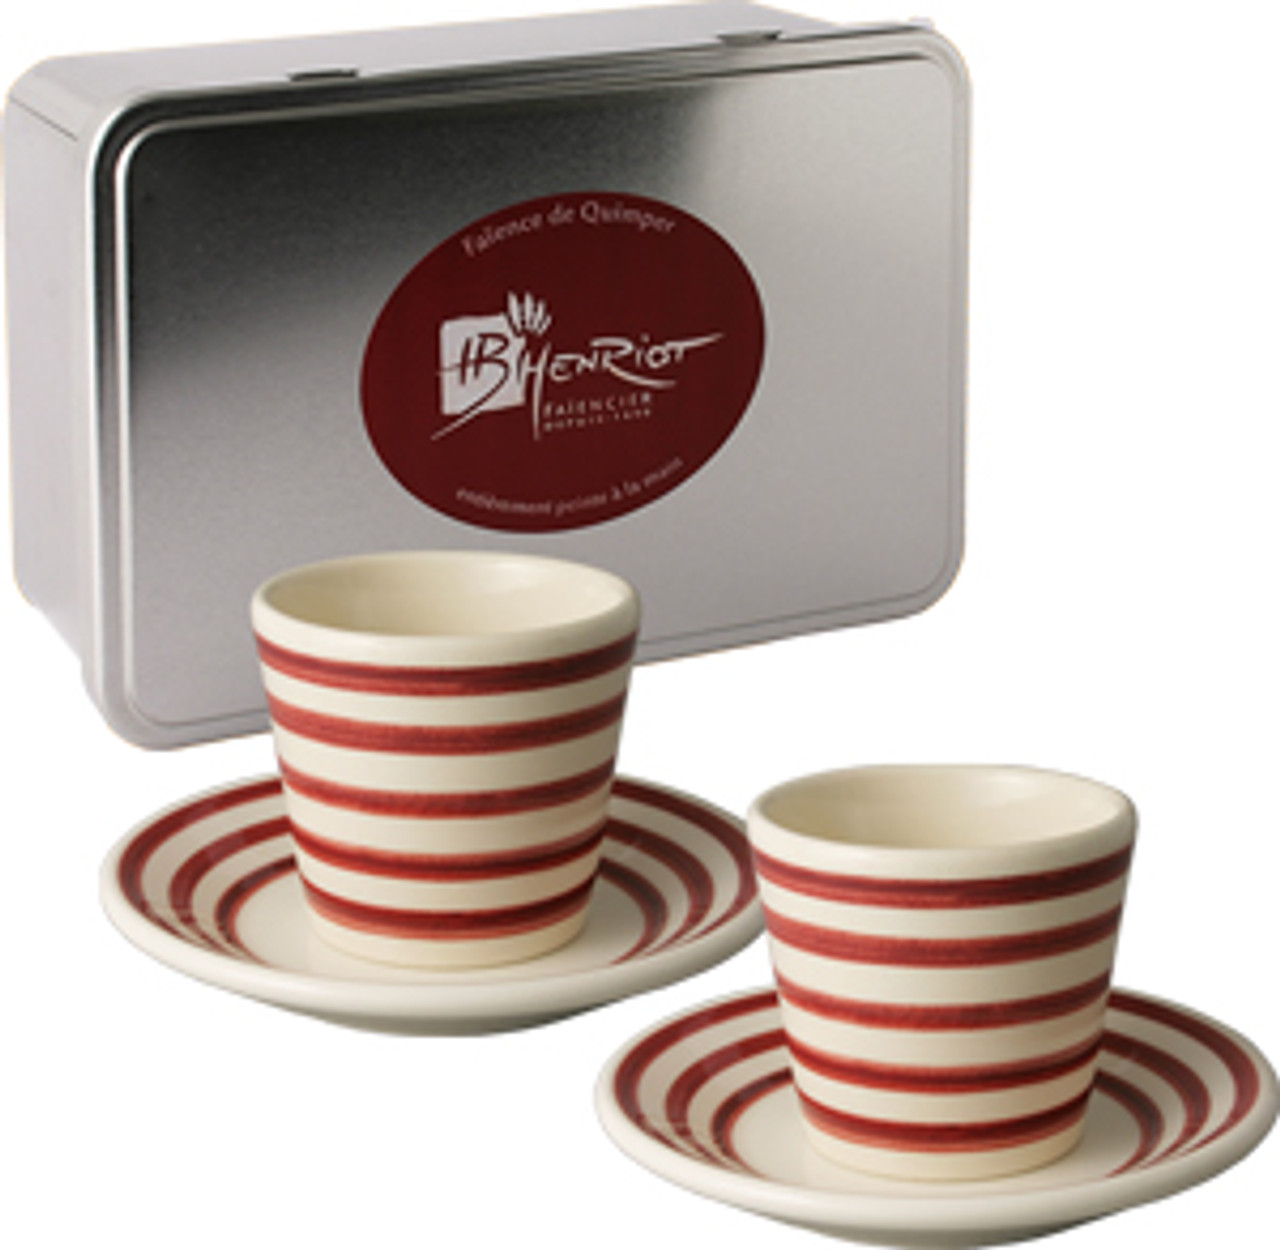 Espresso Cups with Saucers Set Porcelain Coffee Cup Set and Metal